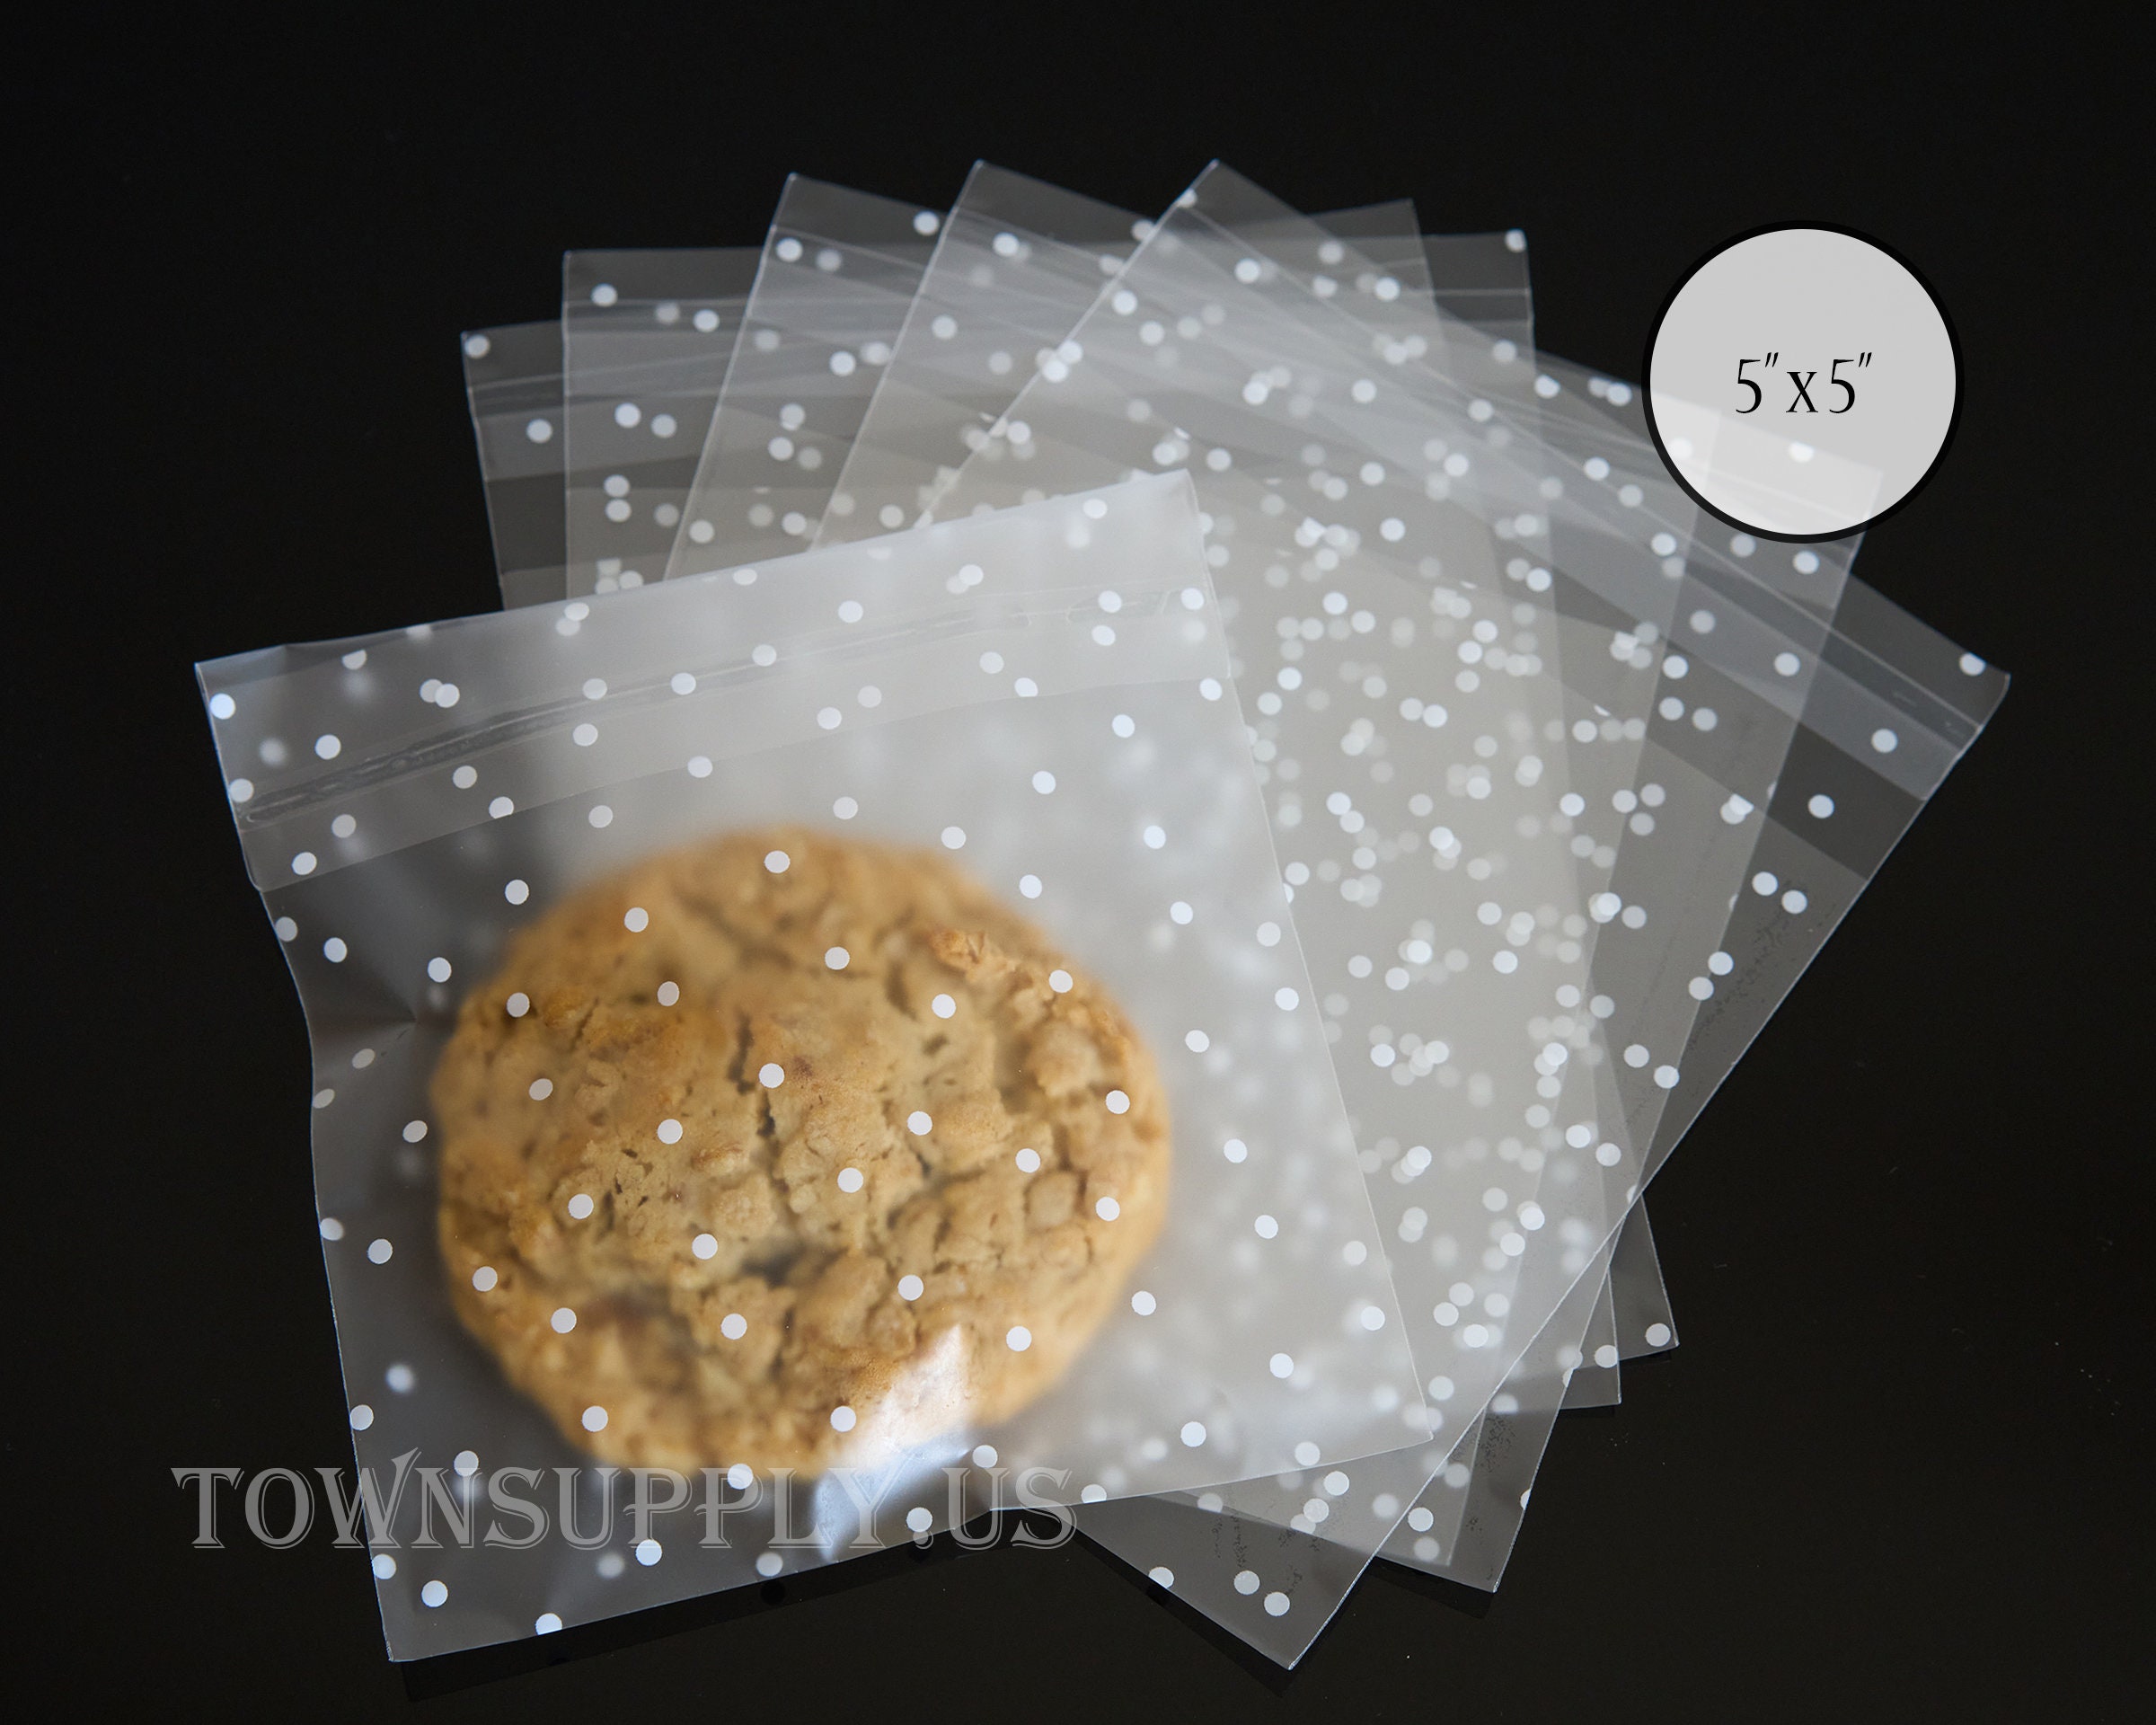 Superper 100 Pcs Clear Plastic Bags White Polka Dot Cellophane Treat Bags for Bakery Cookies Decorative Wrappers Wedding Party Gift 5.55.5cm+3cm 